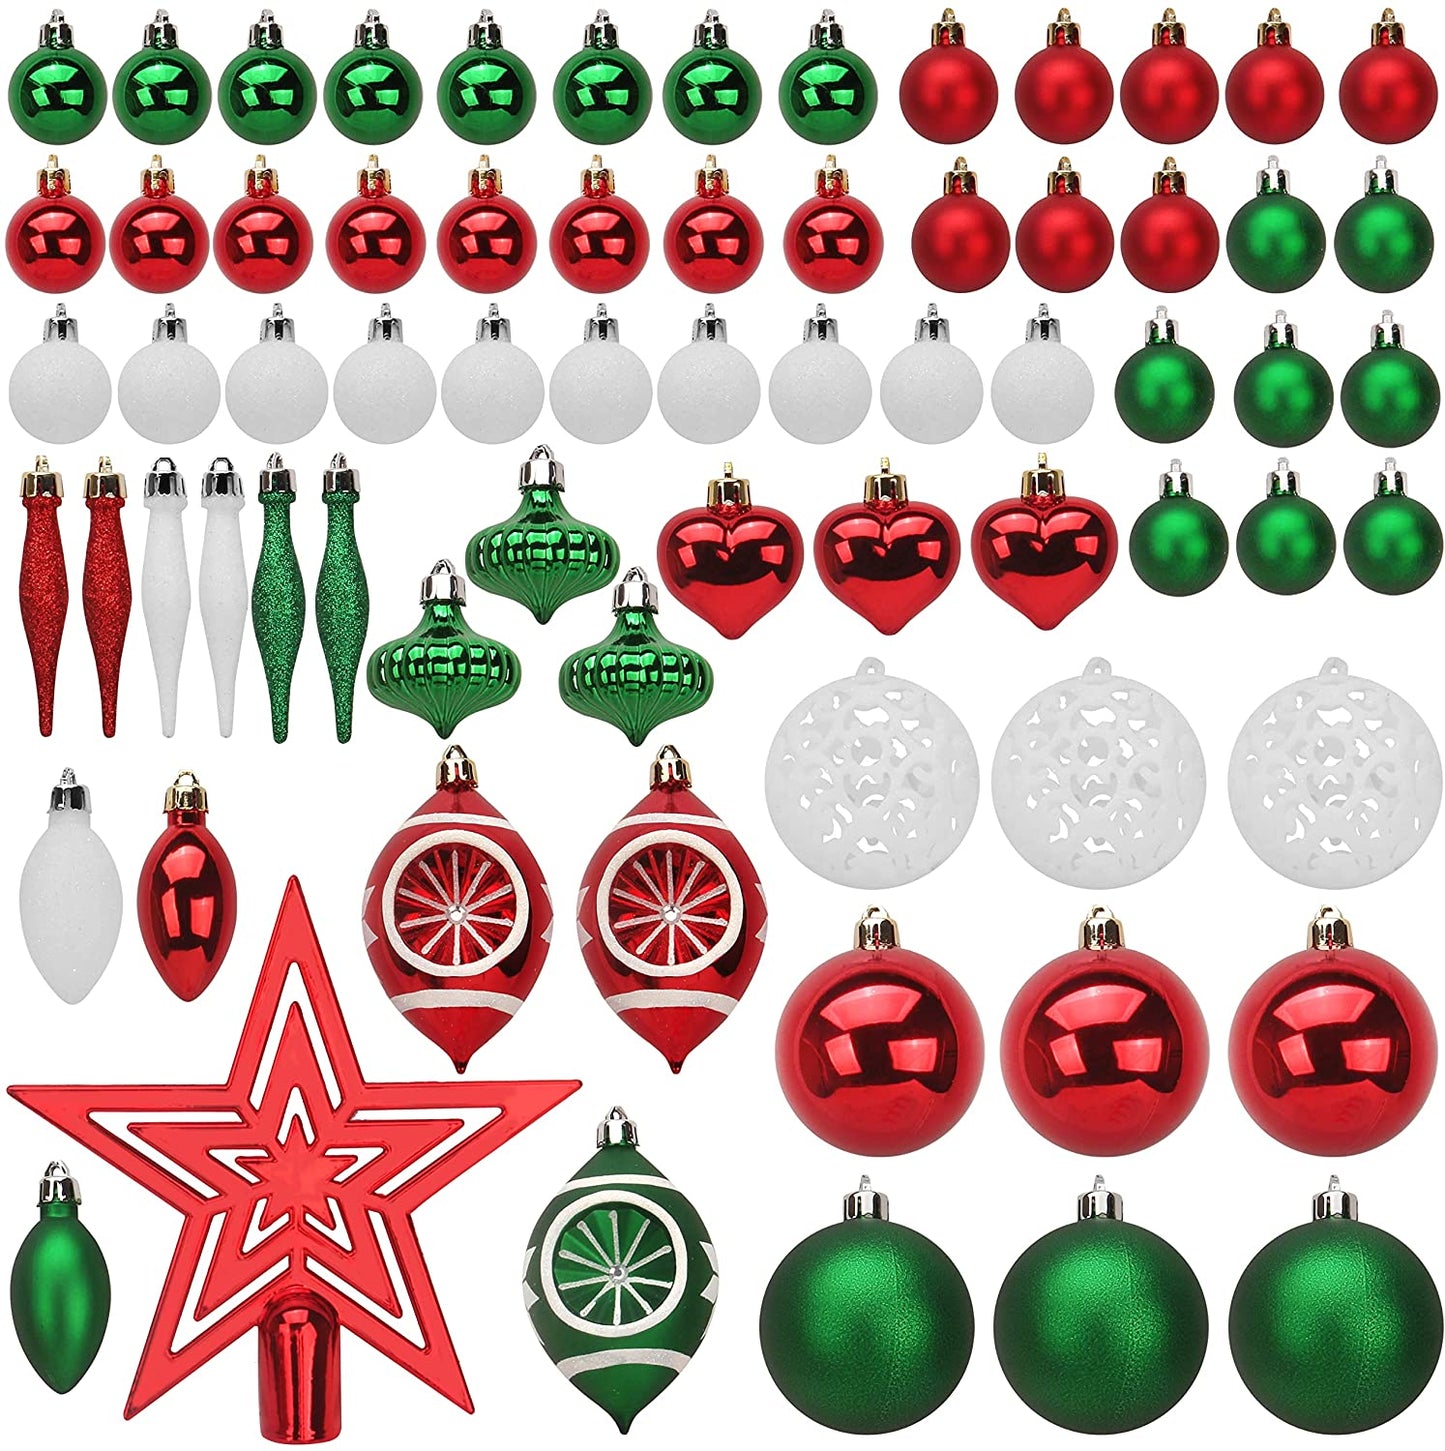 70 Pcs Christmas Ornaments with Heart Red, Green, & White